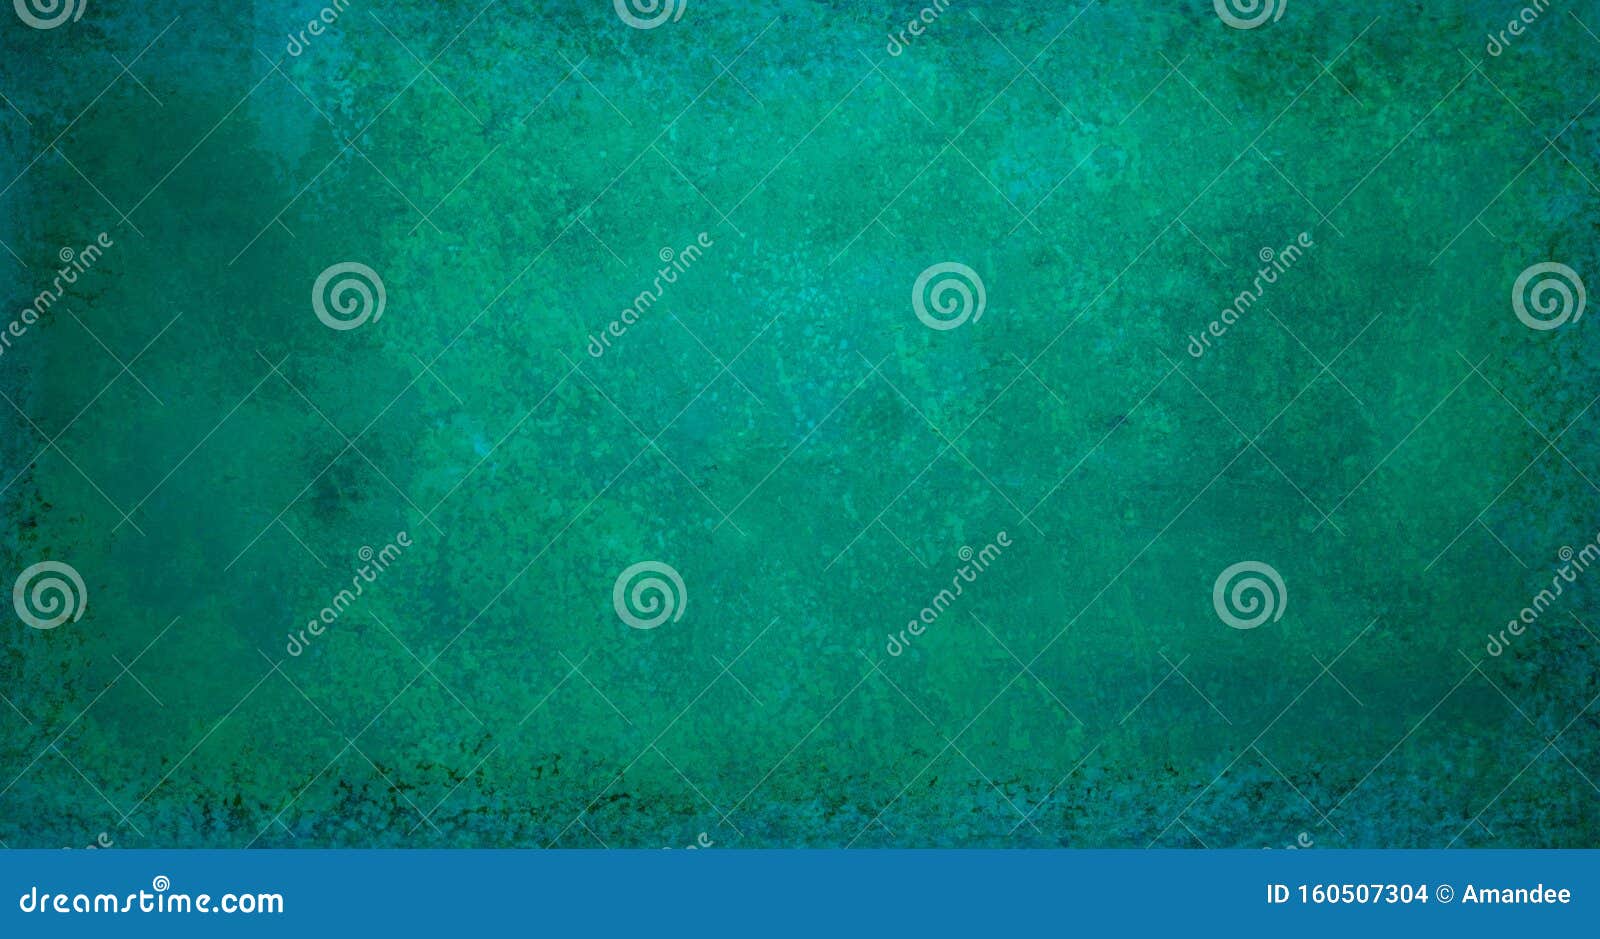 blue green background with vintage distressed texture that is messy scuffed and aged in a classy elegant 